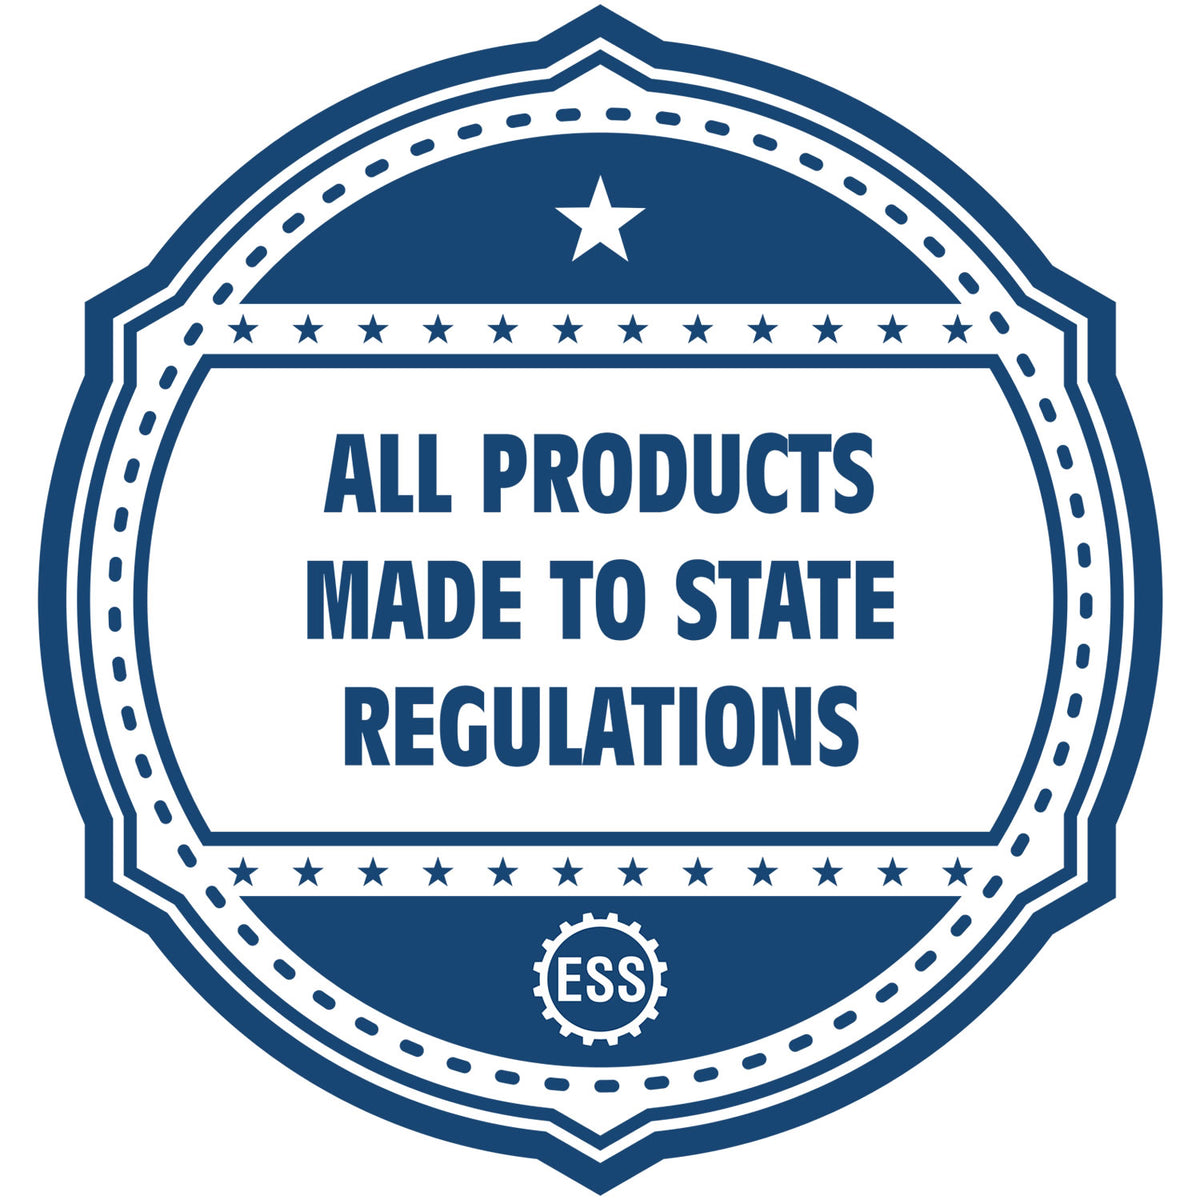 A blue icon or badge for the Gift Washington Architect Seal showing that this product is made in compliance with state regulations.